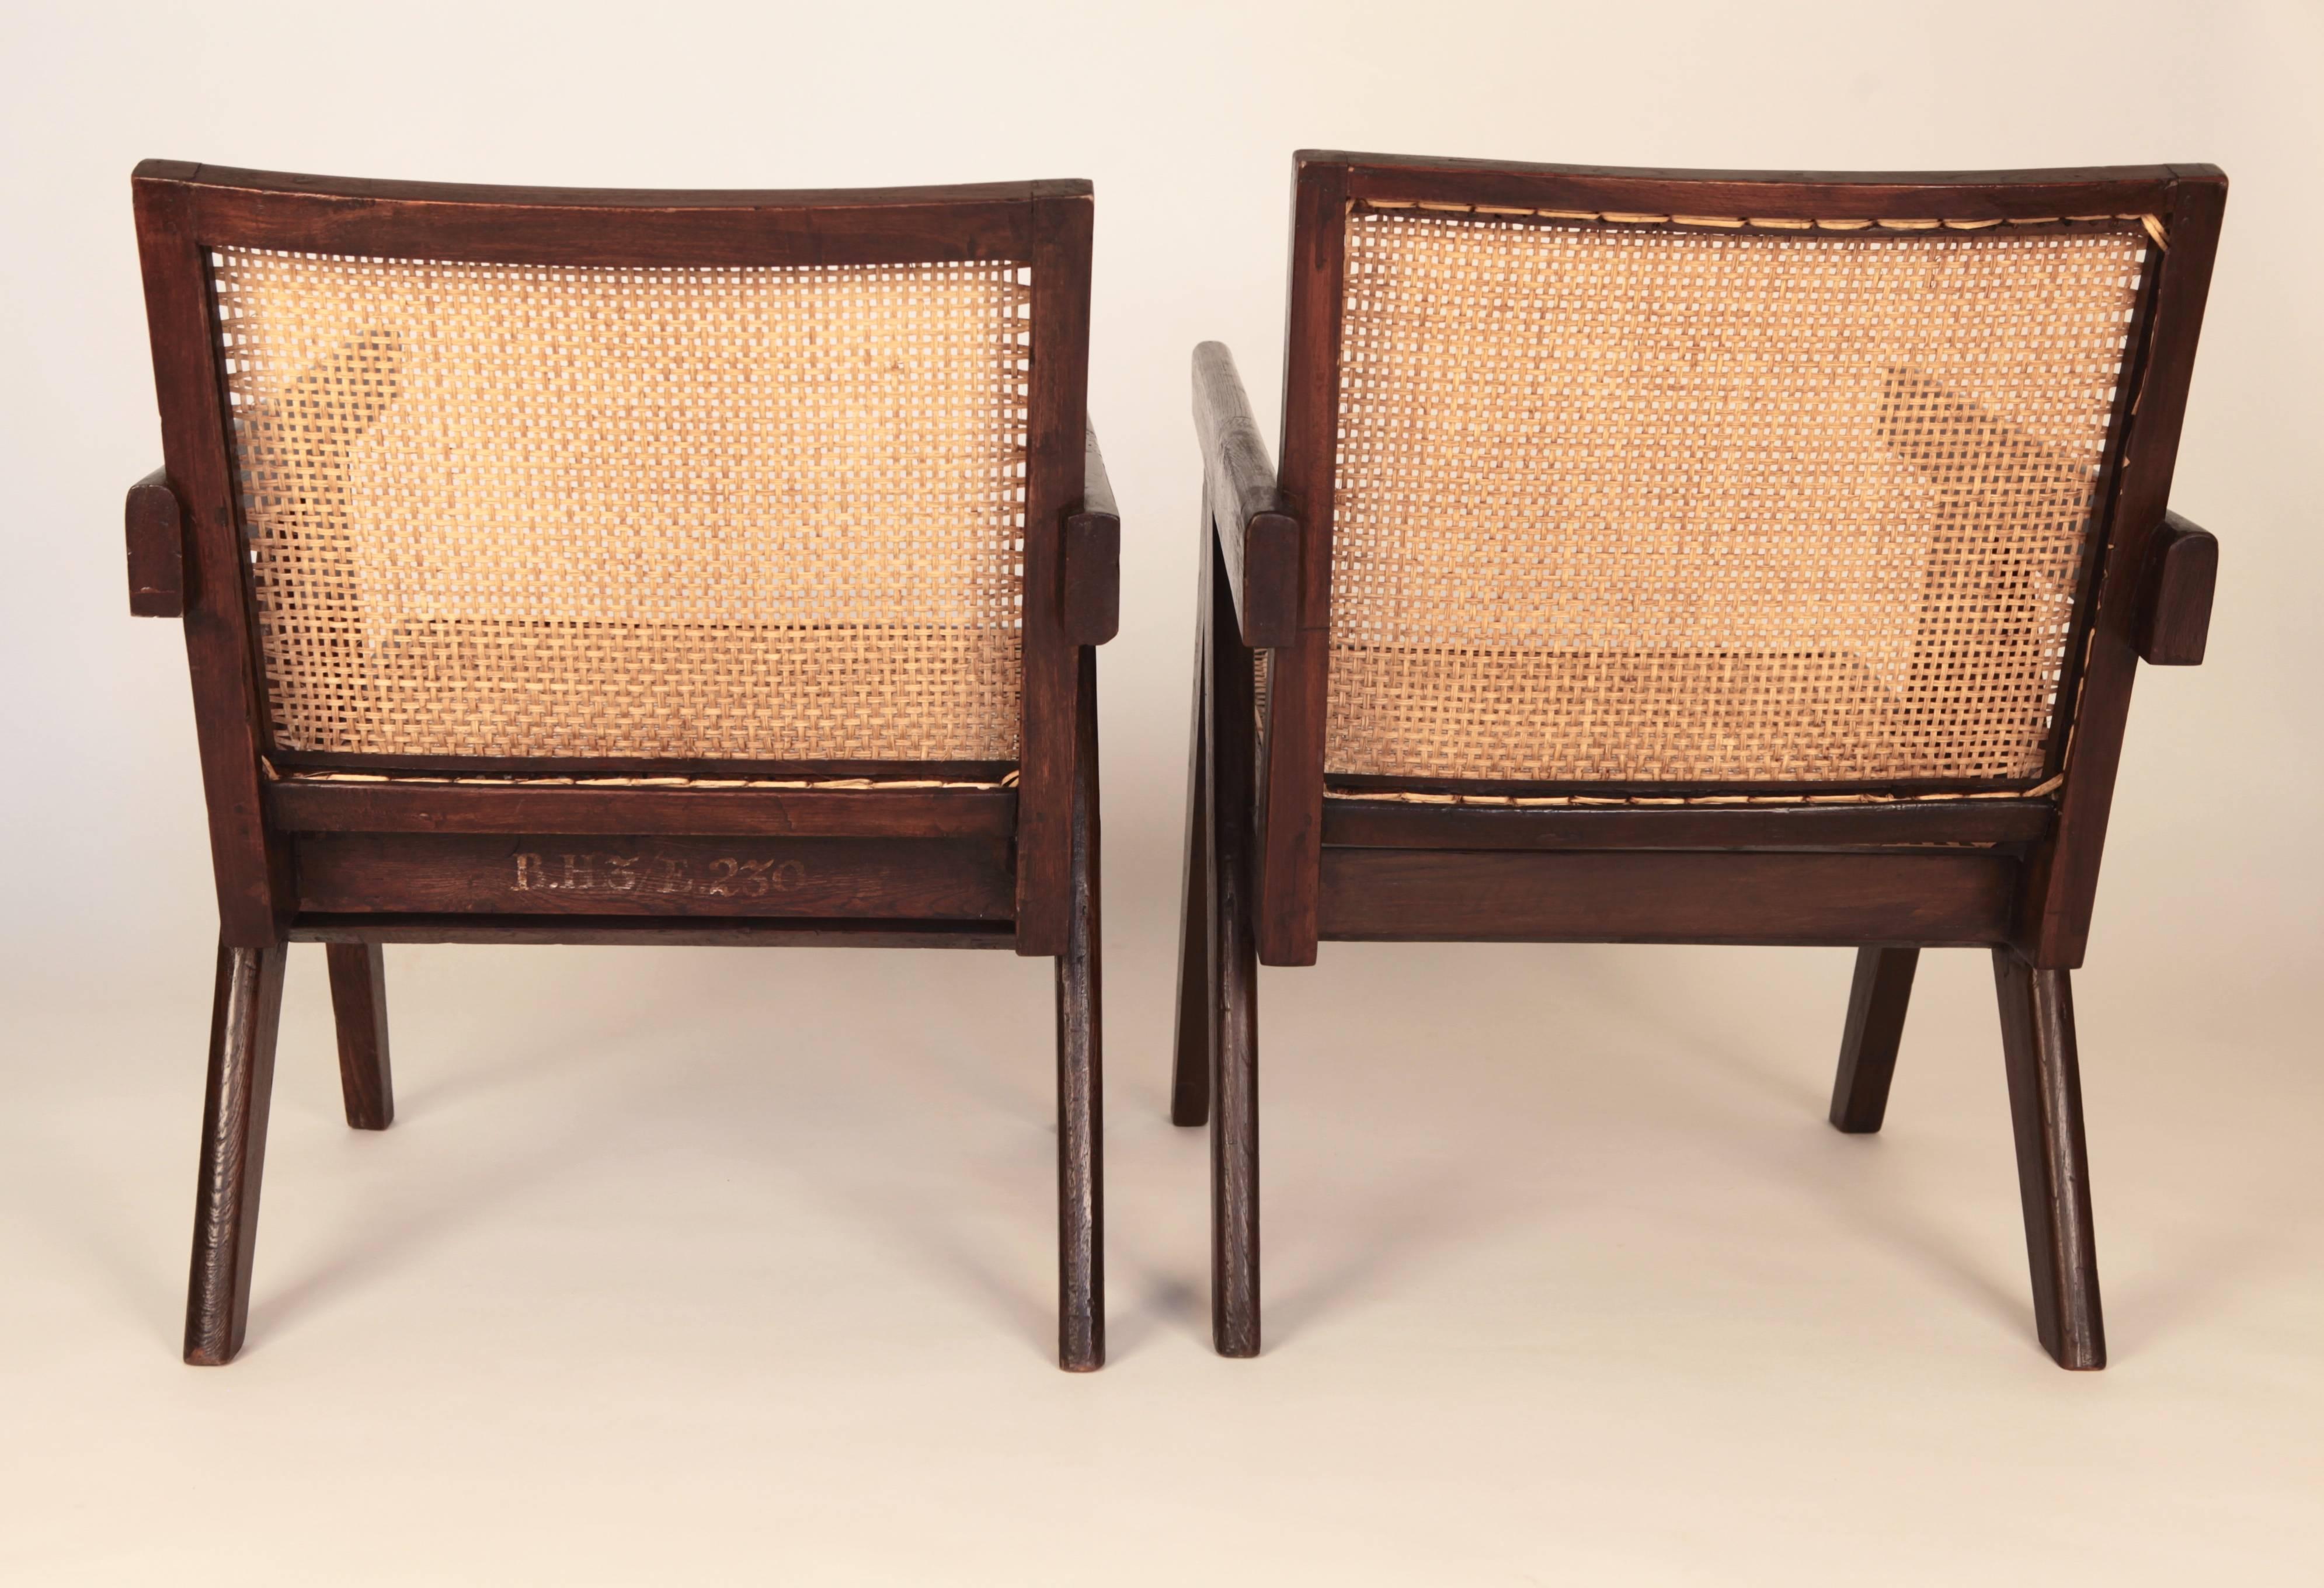 Indian Pierre Jeanneret, Pair of Easy Armchairs, Chandigarh, India, 1955